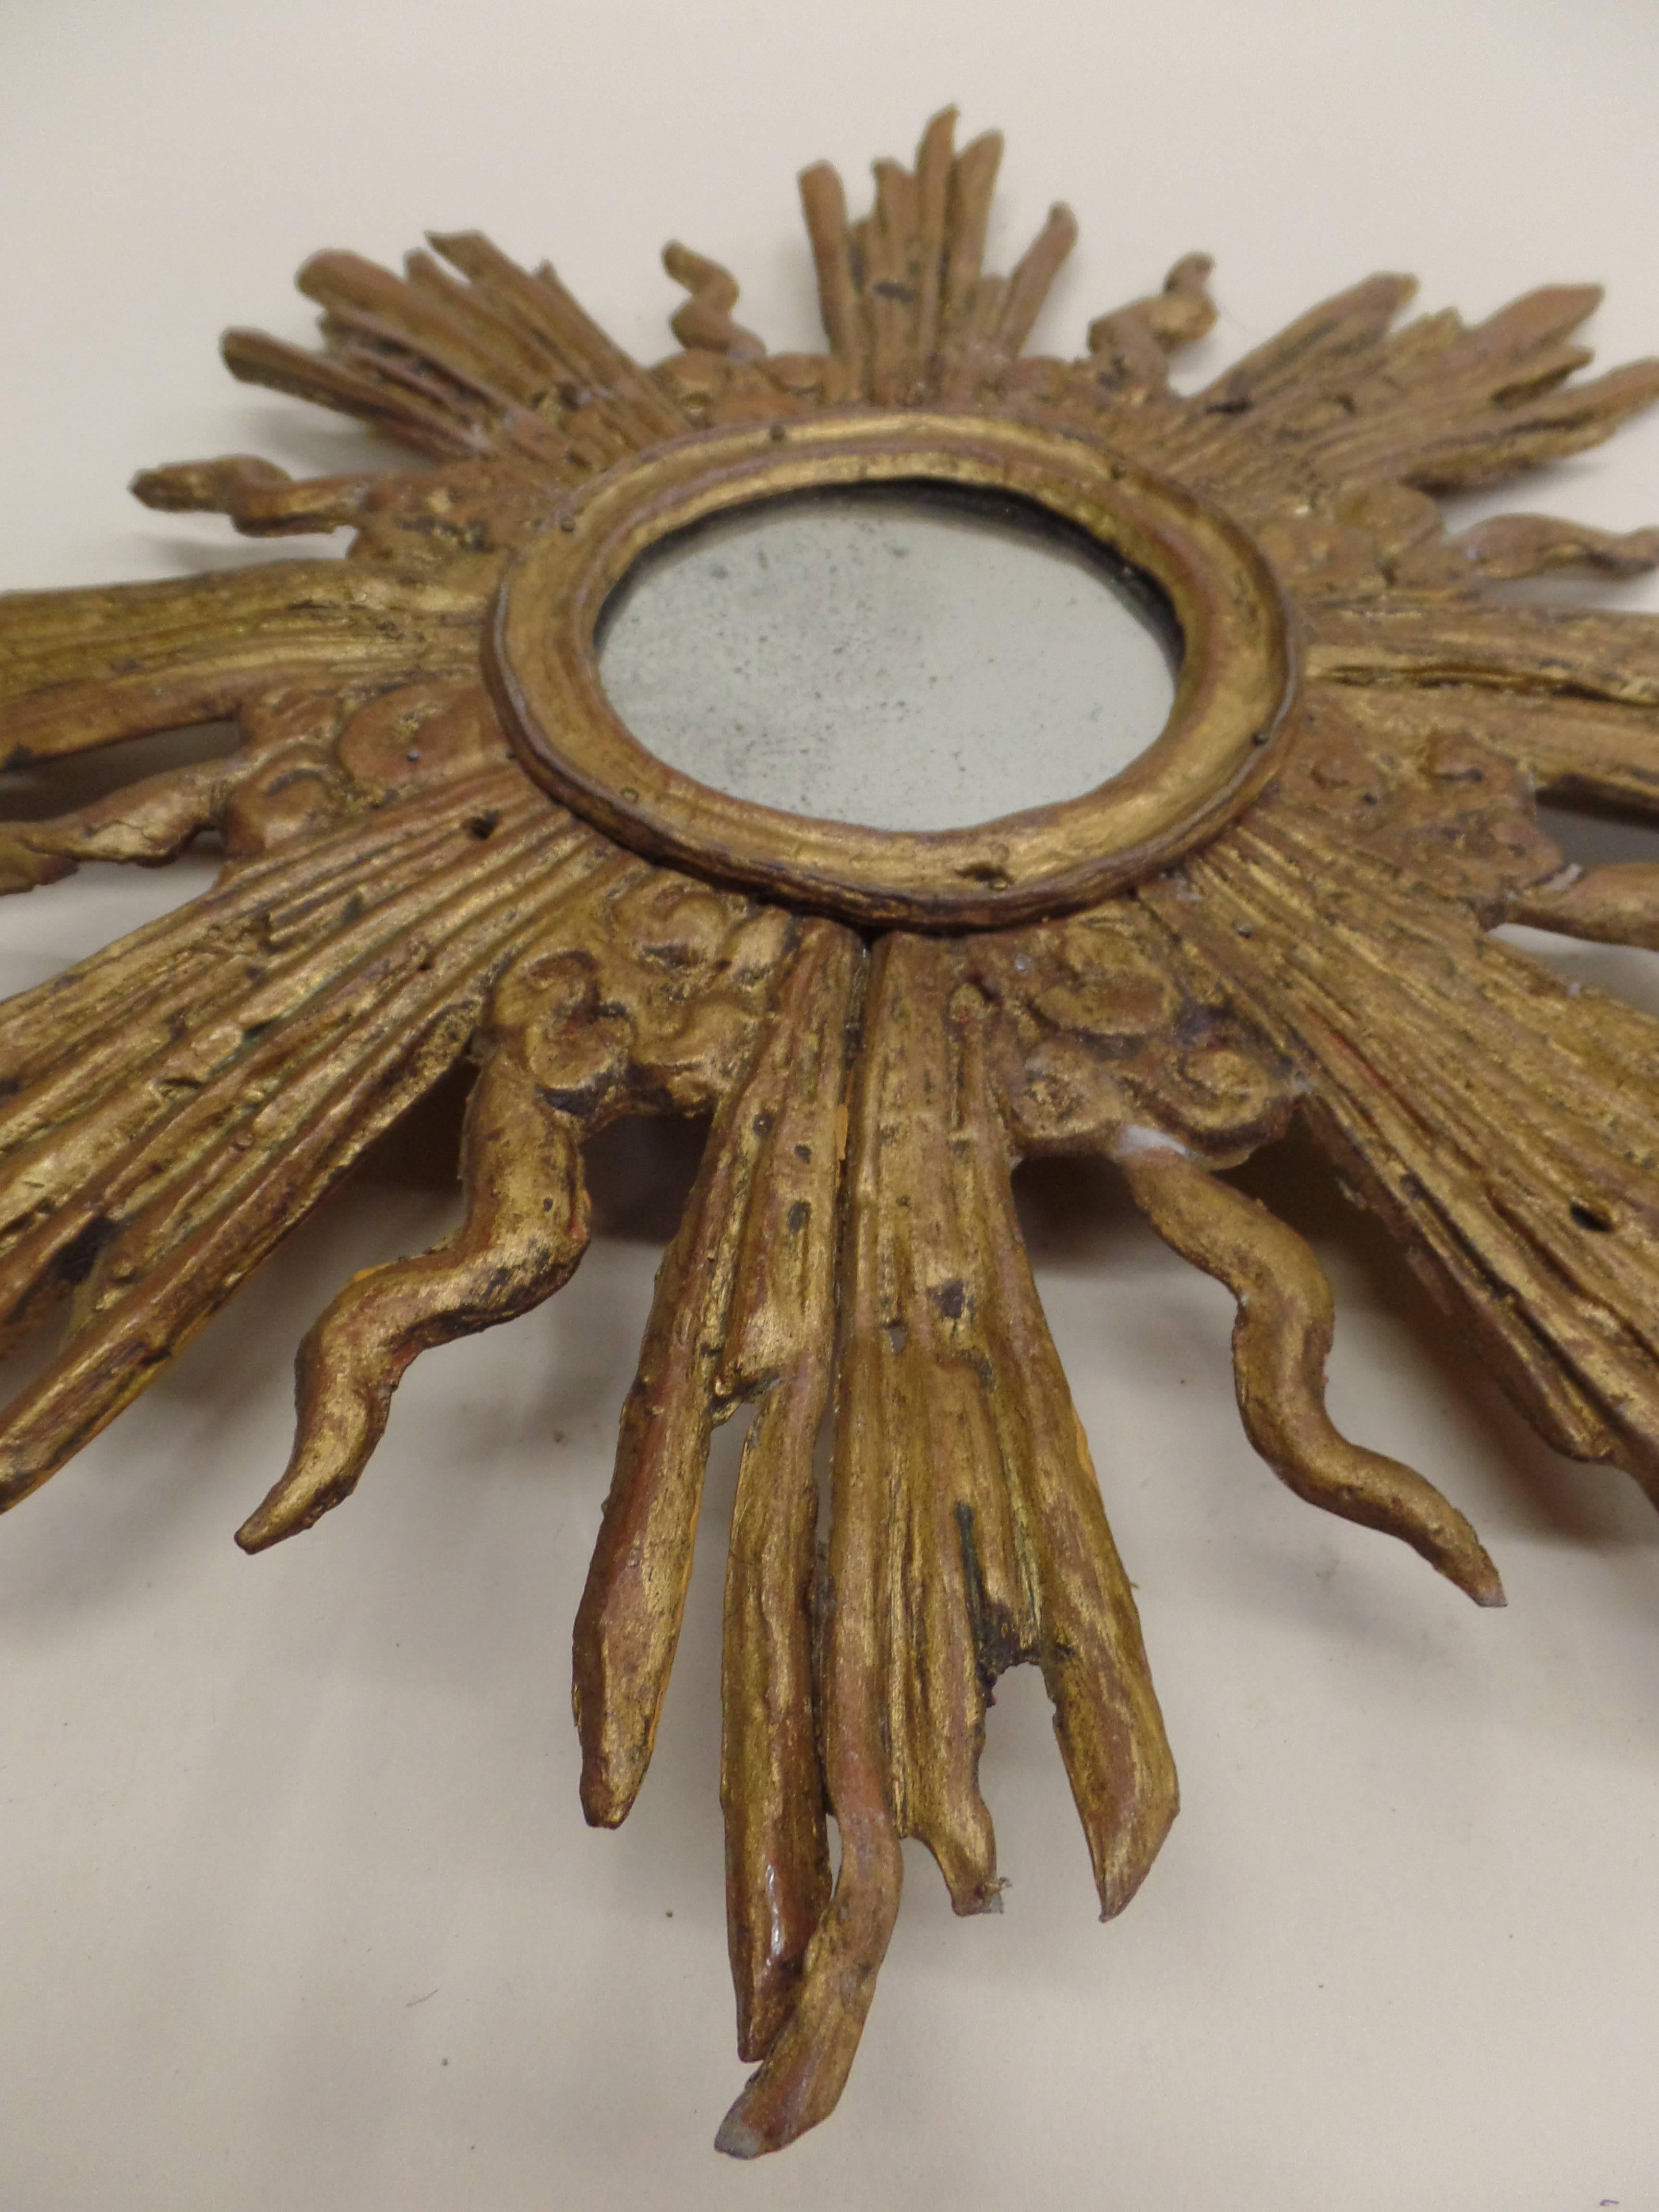 20th Century French Modern Neoclassical Gilt Lead Sunburst Mirror Attributed to Maison Jansen For Sale